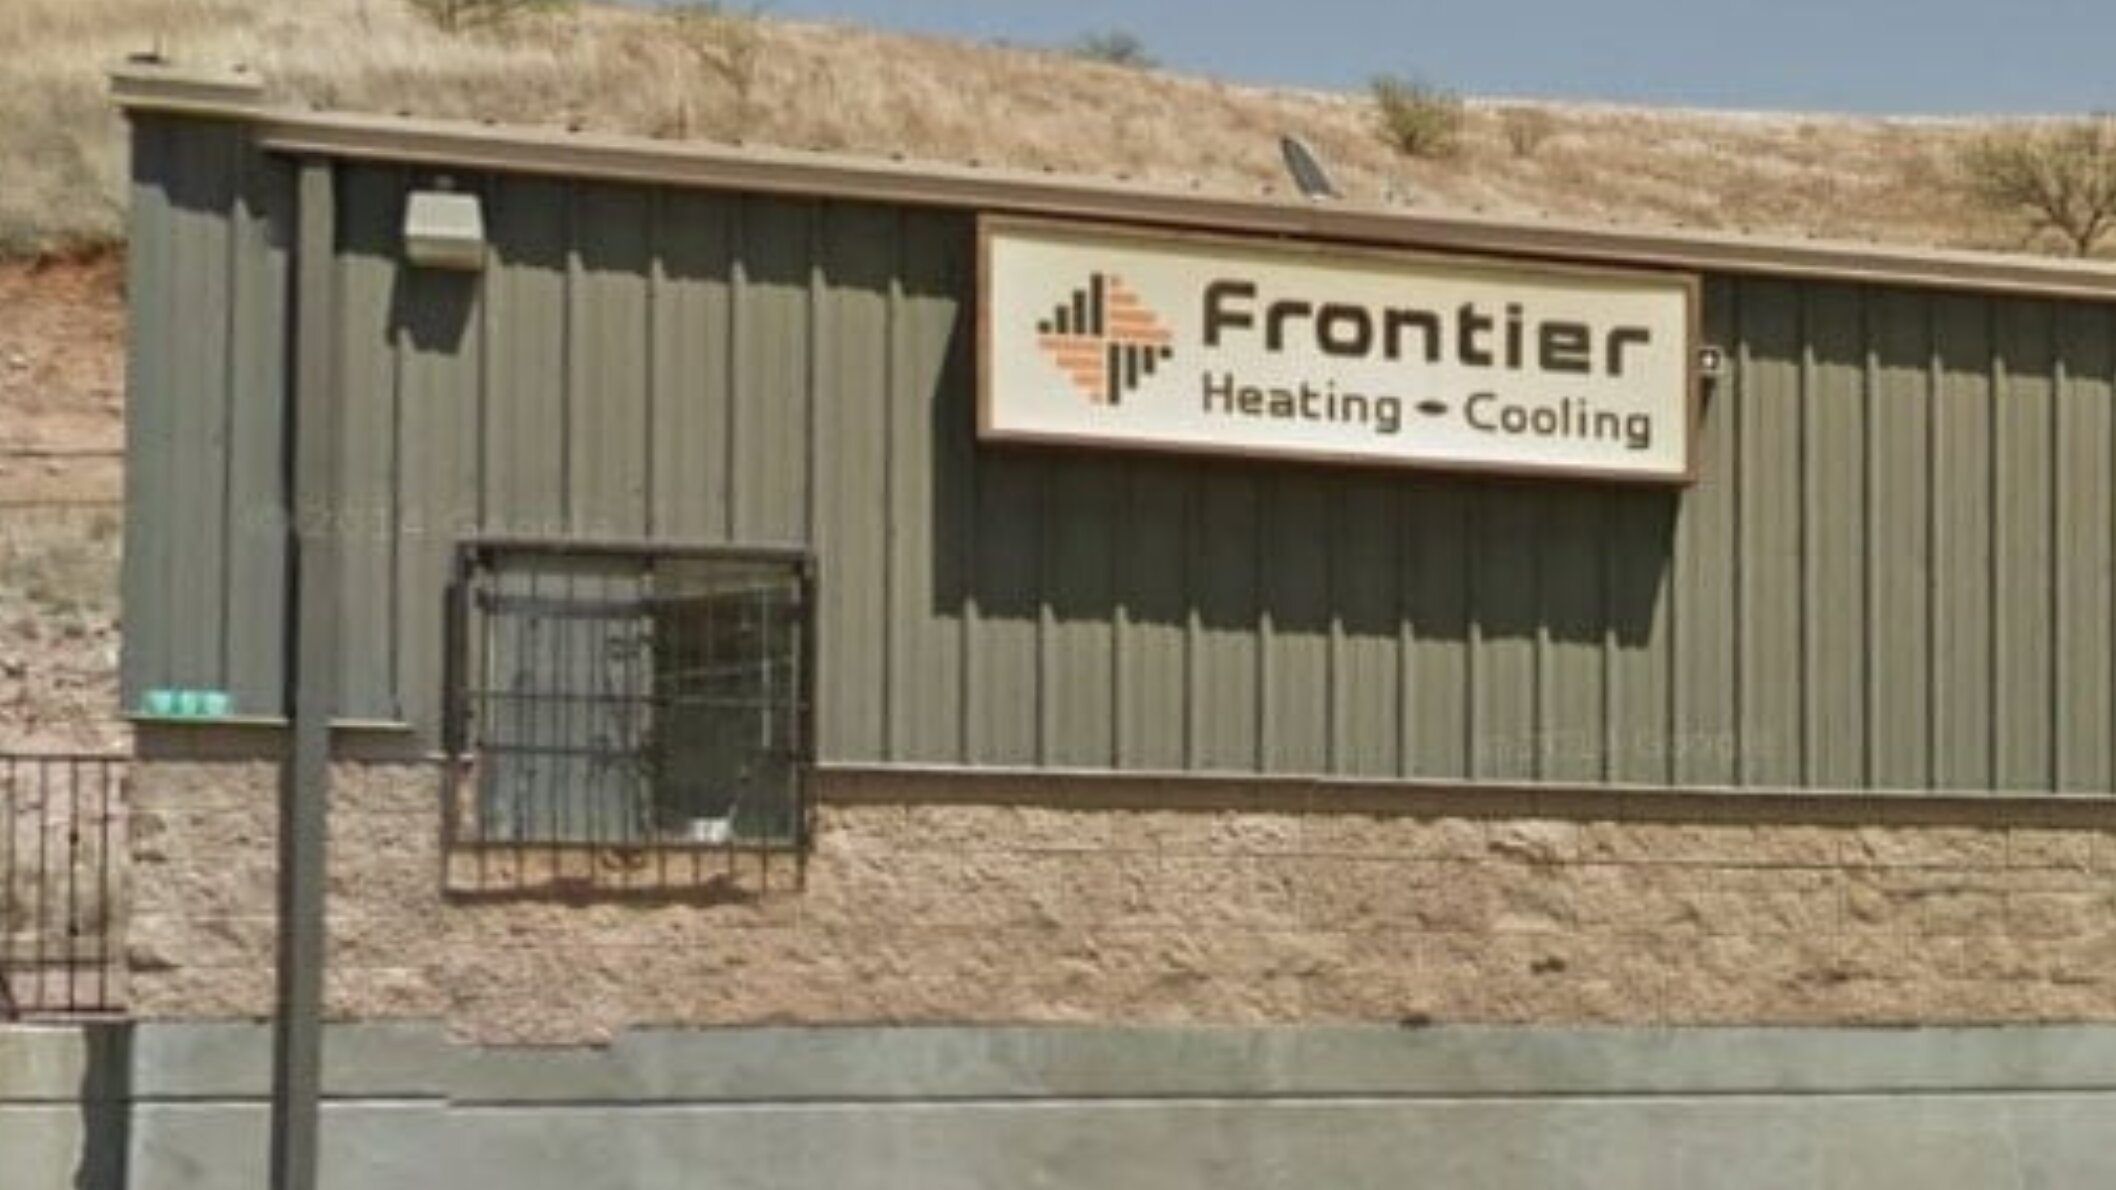 Frontier Heating & Cooling, Inc. 950 N Industrial Park Ave, Nogales Arizona 85621